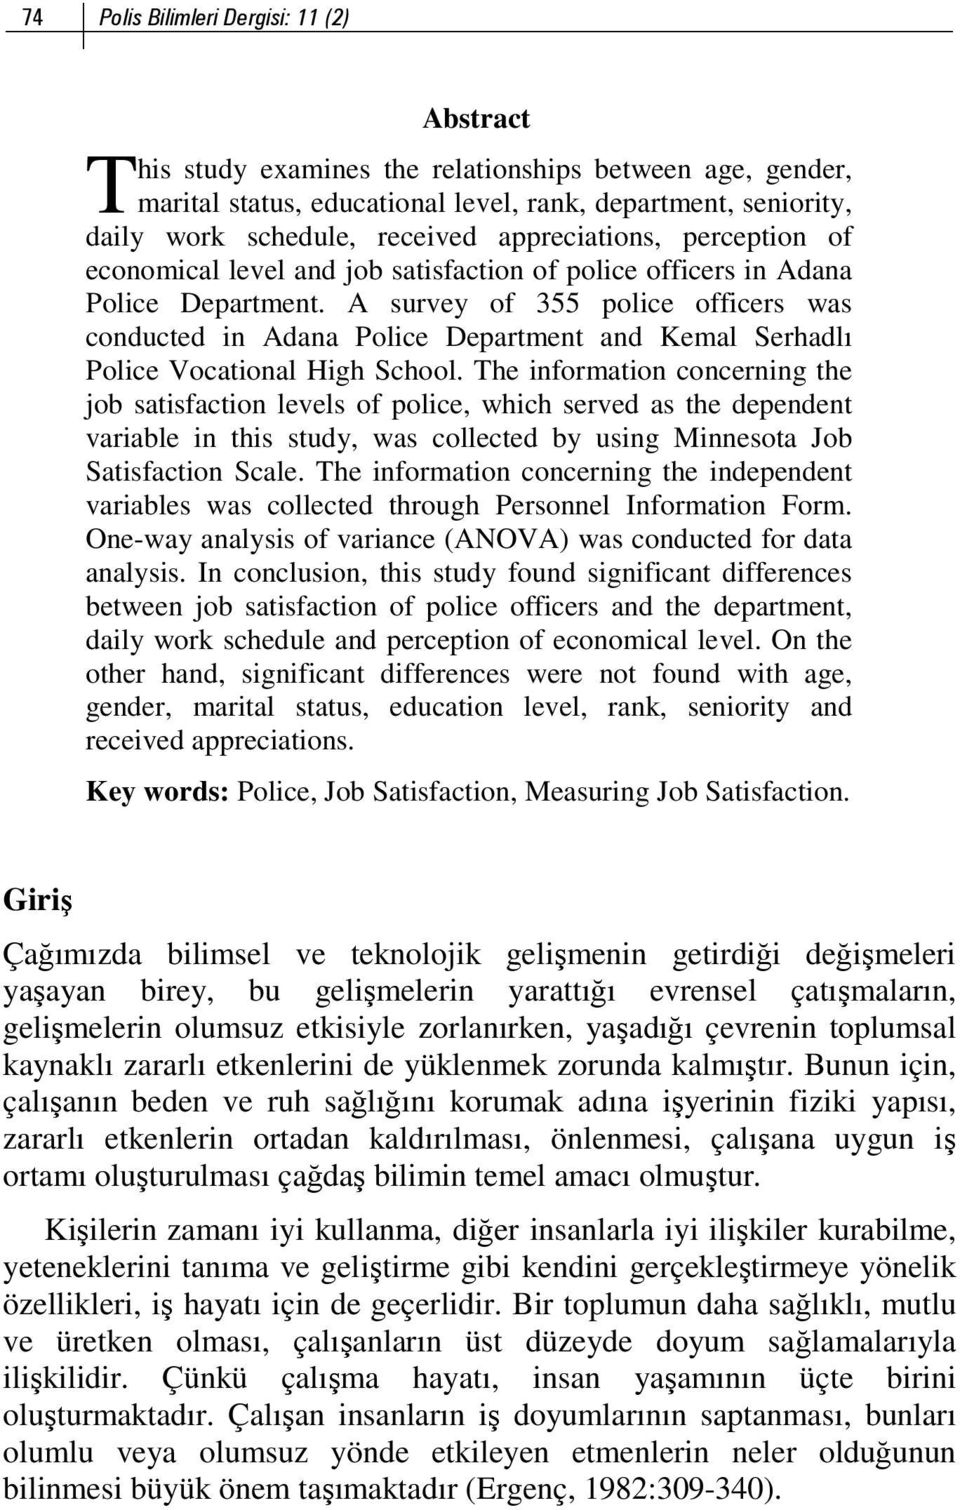 A survey of 355 police officers was conducted in Adana Police Department and Kemal Serhadlı Police Vocational High School.